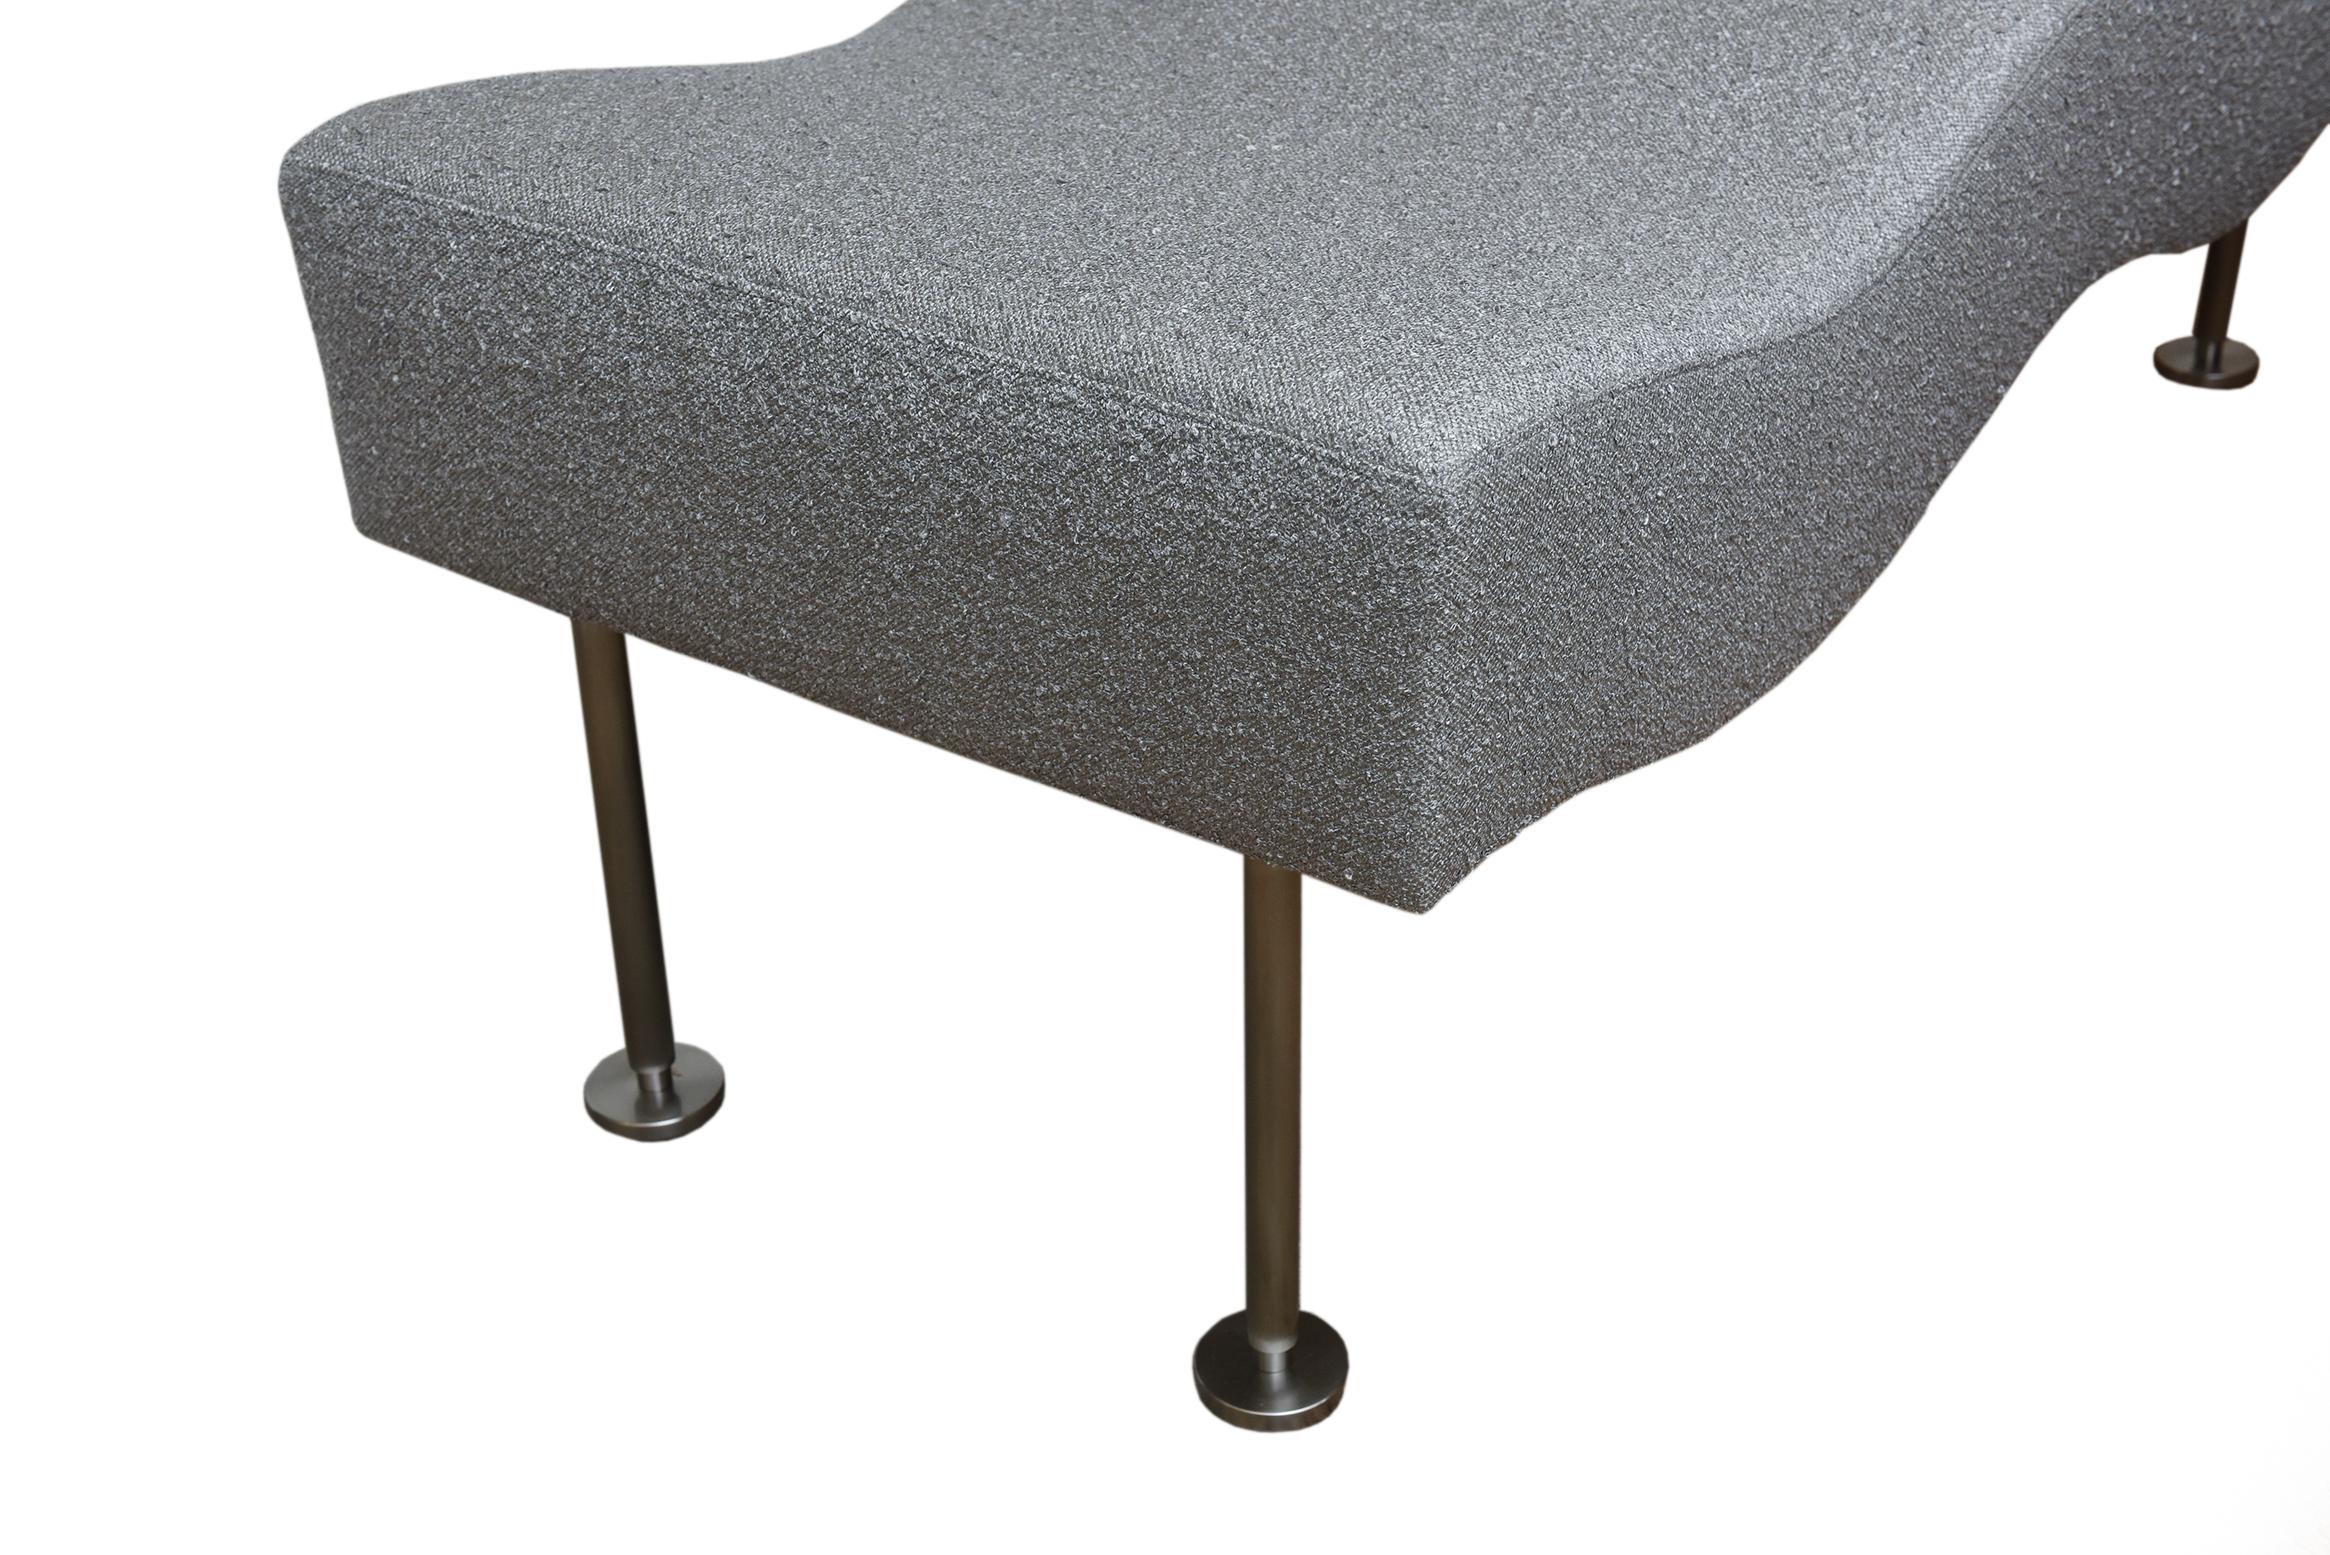 American Brueton Undulatus Silver Gray Boucle Upholstered Bench with Stainless Steel Legs